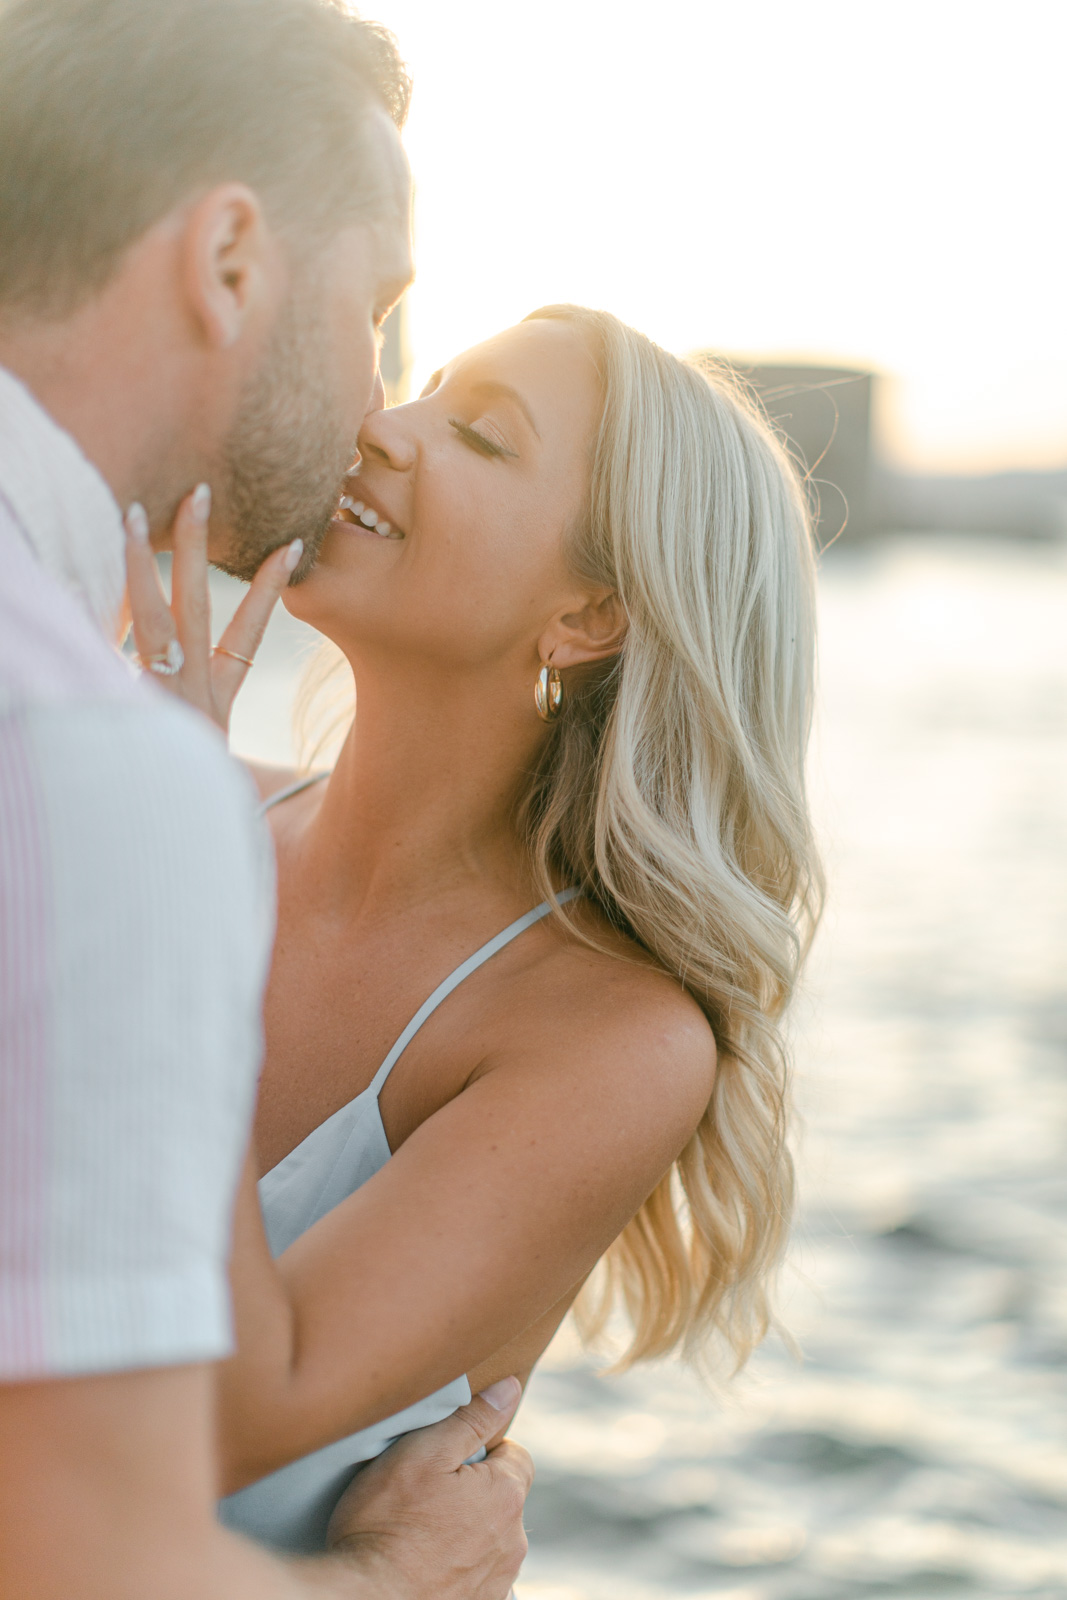 Fall in love all over again with stunning engagement session photos. Let me capture the romance and intimacy of your relationship before your big day. Contact me today to schedule your engagement session